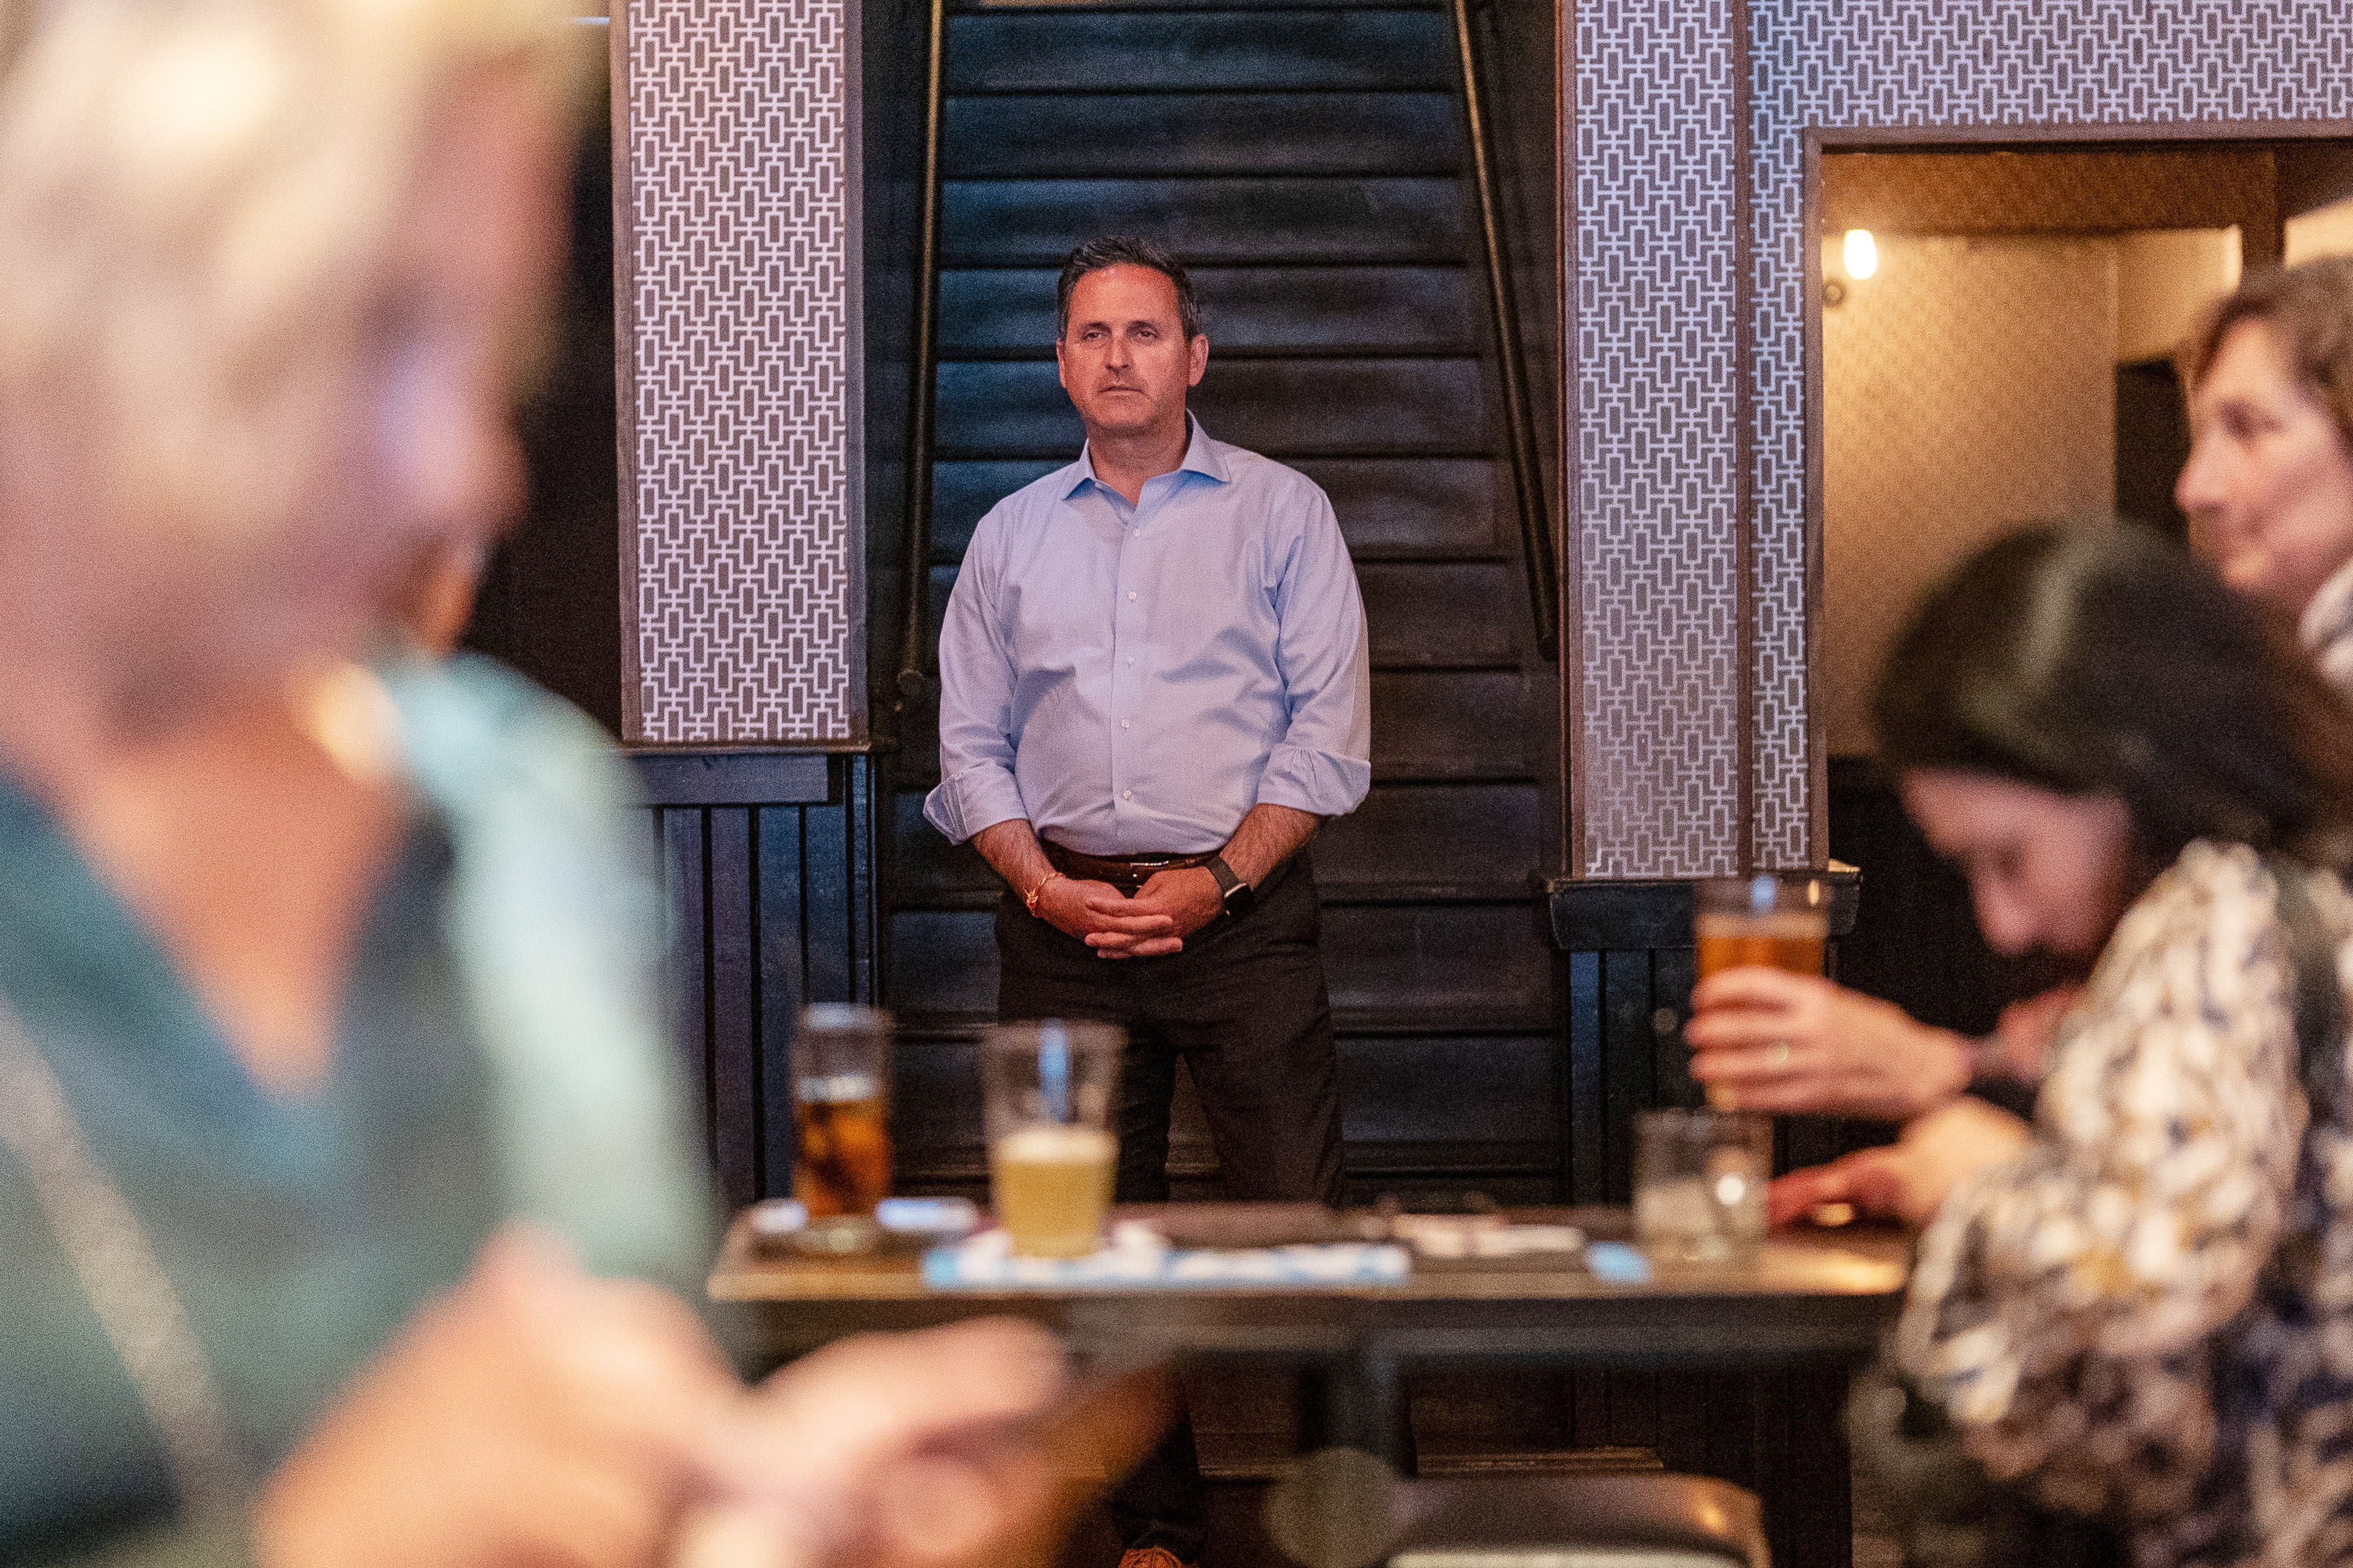 A man stands alone with a serious expression in a bustling bar scene, observed by unfocused patrons engaged in conversations and drinking.